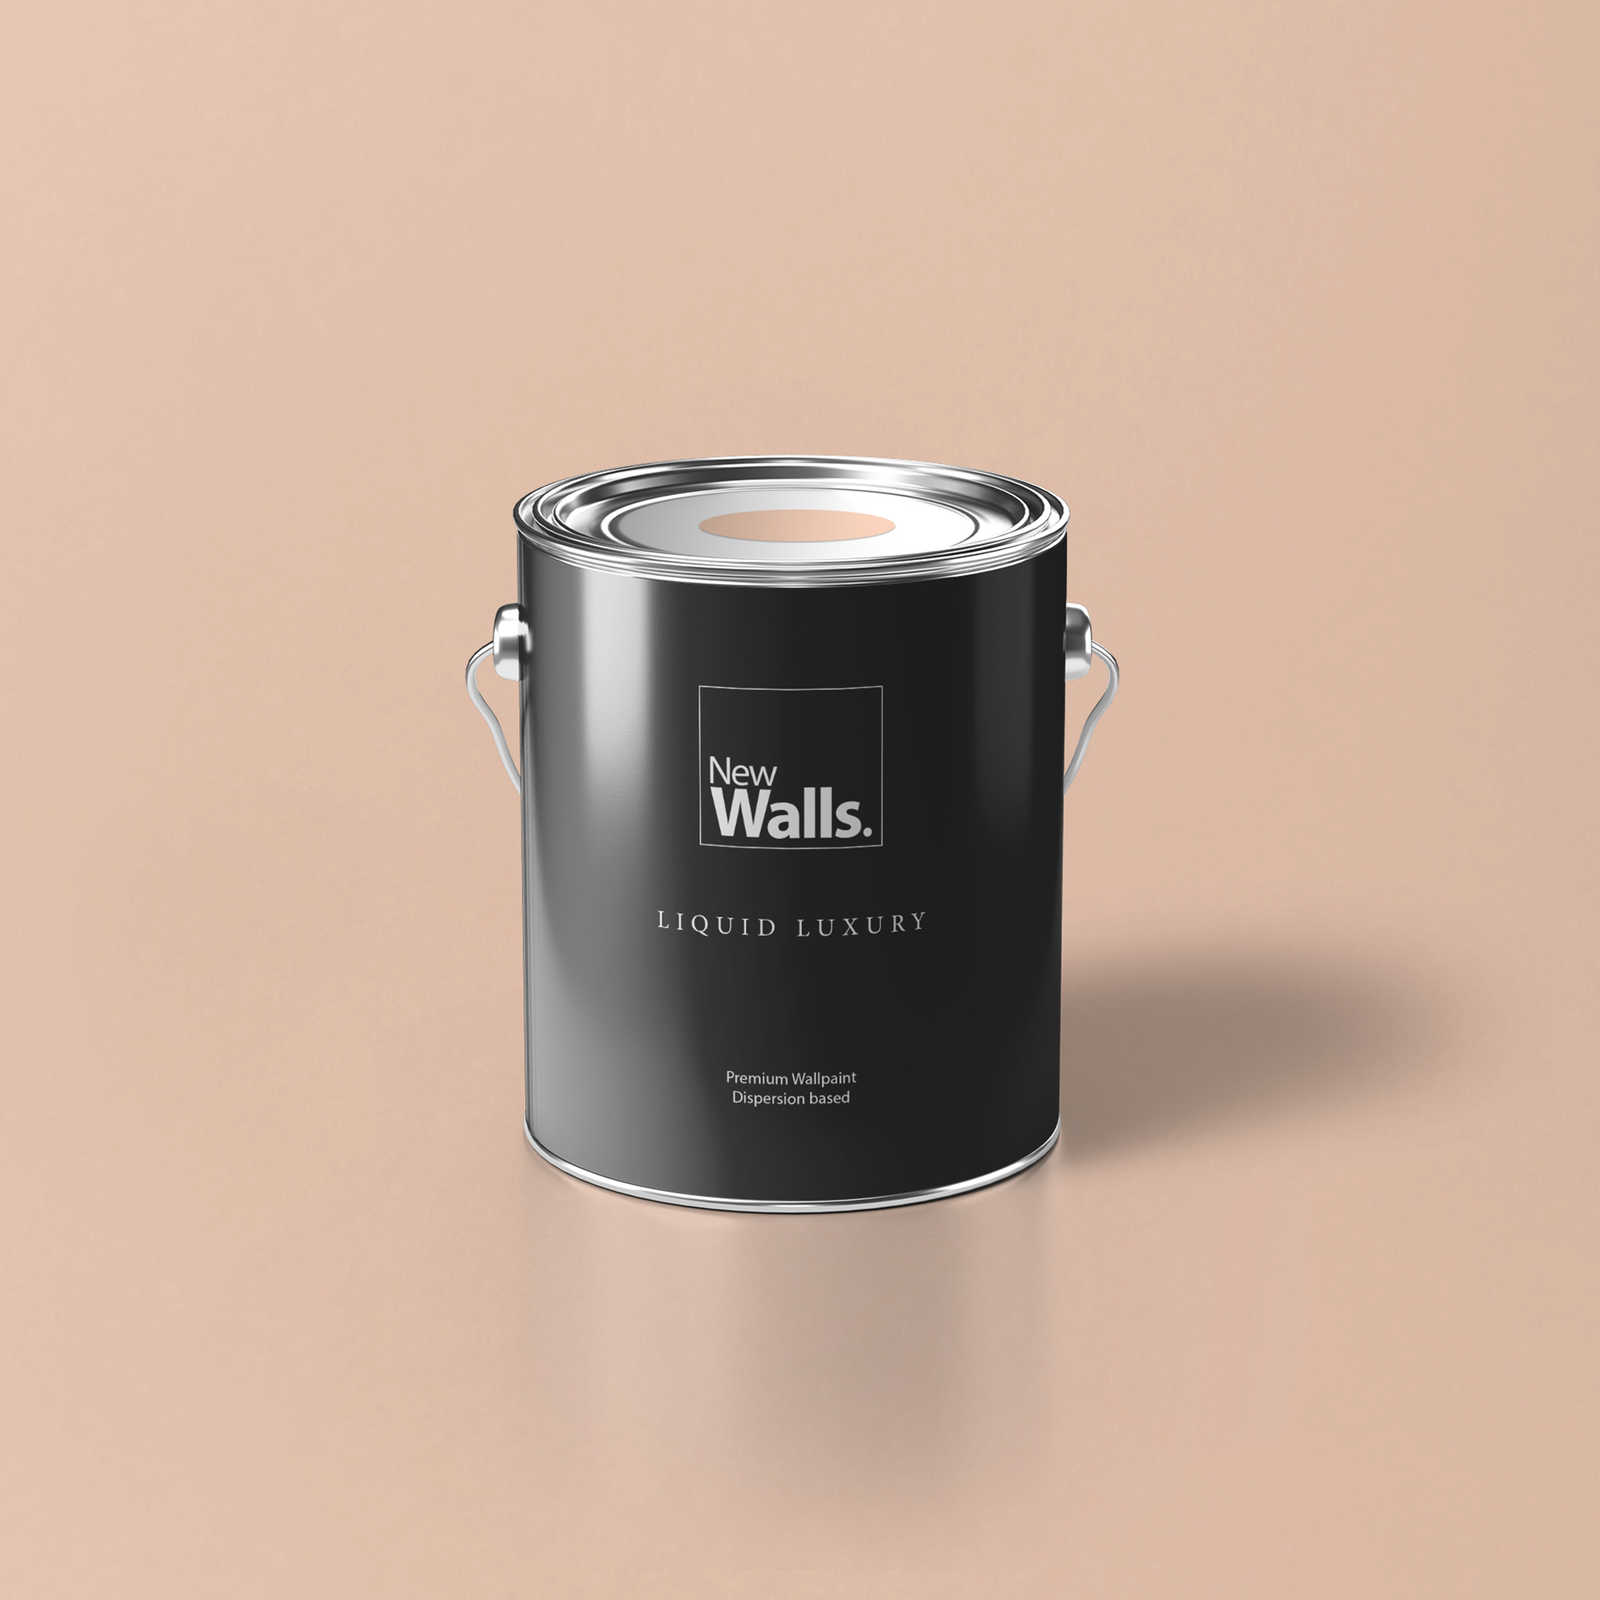 Premium Wall Paint lovely apricot »Active Apricot« NW911 – 2,5 litre
